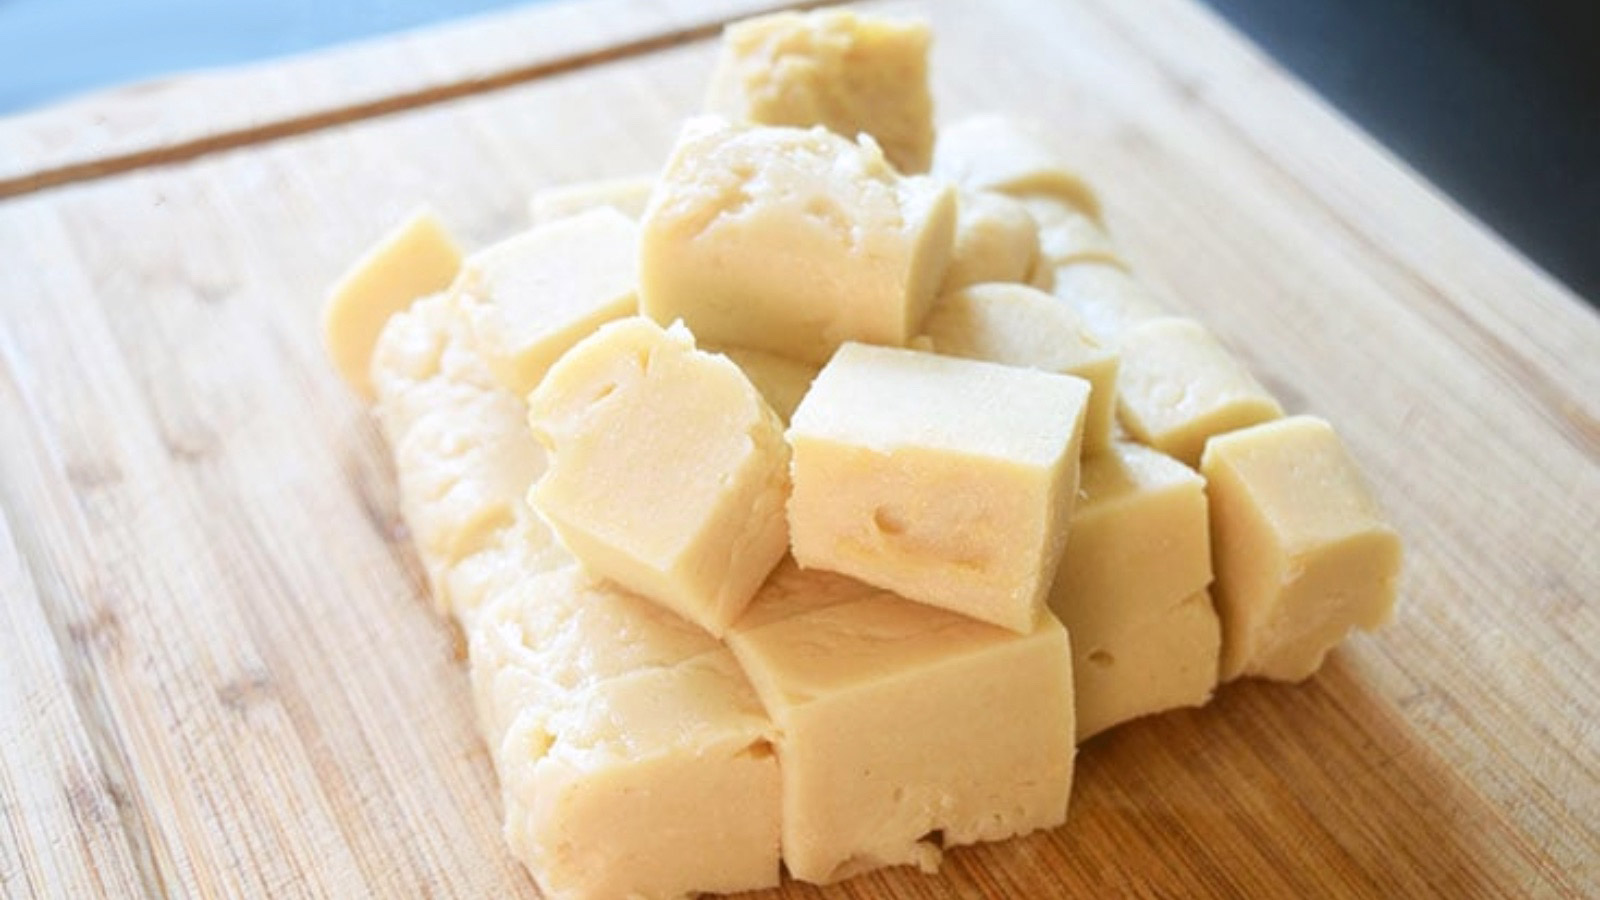 A pile of Chickpea Tofu cubes laying on a cutting board.